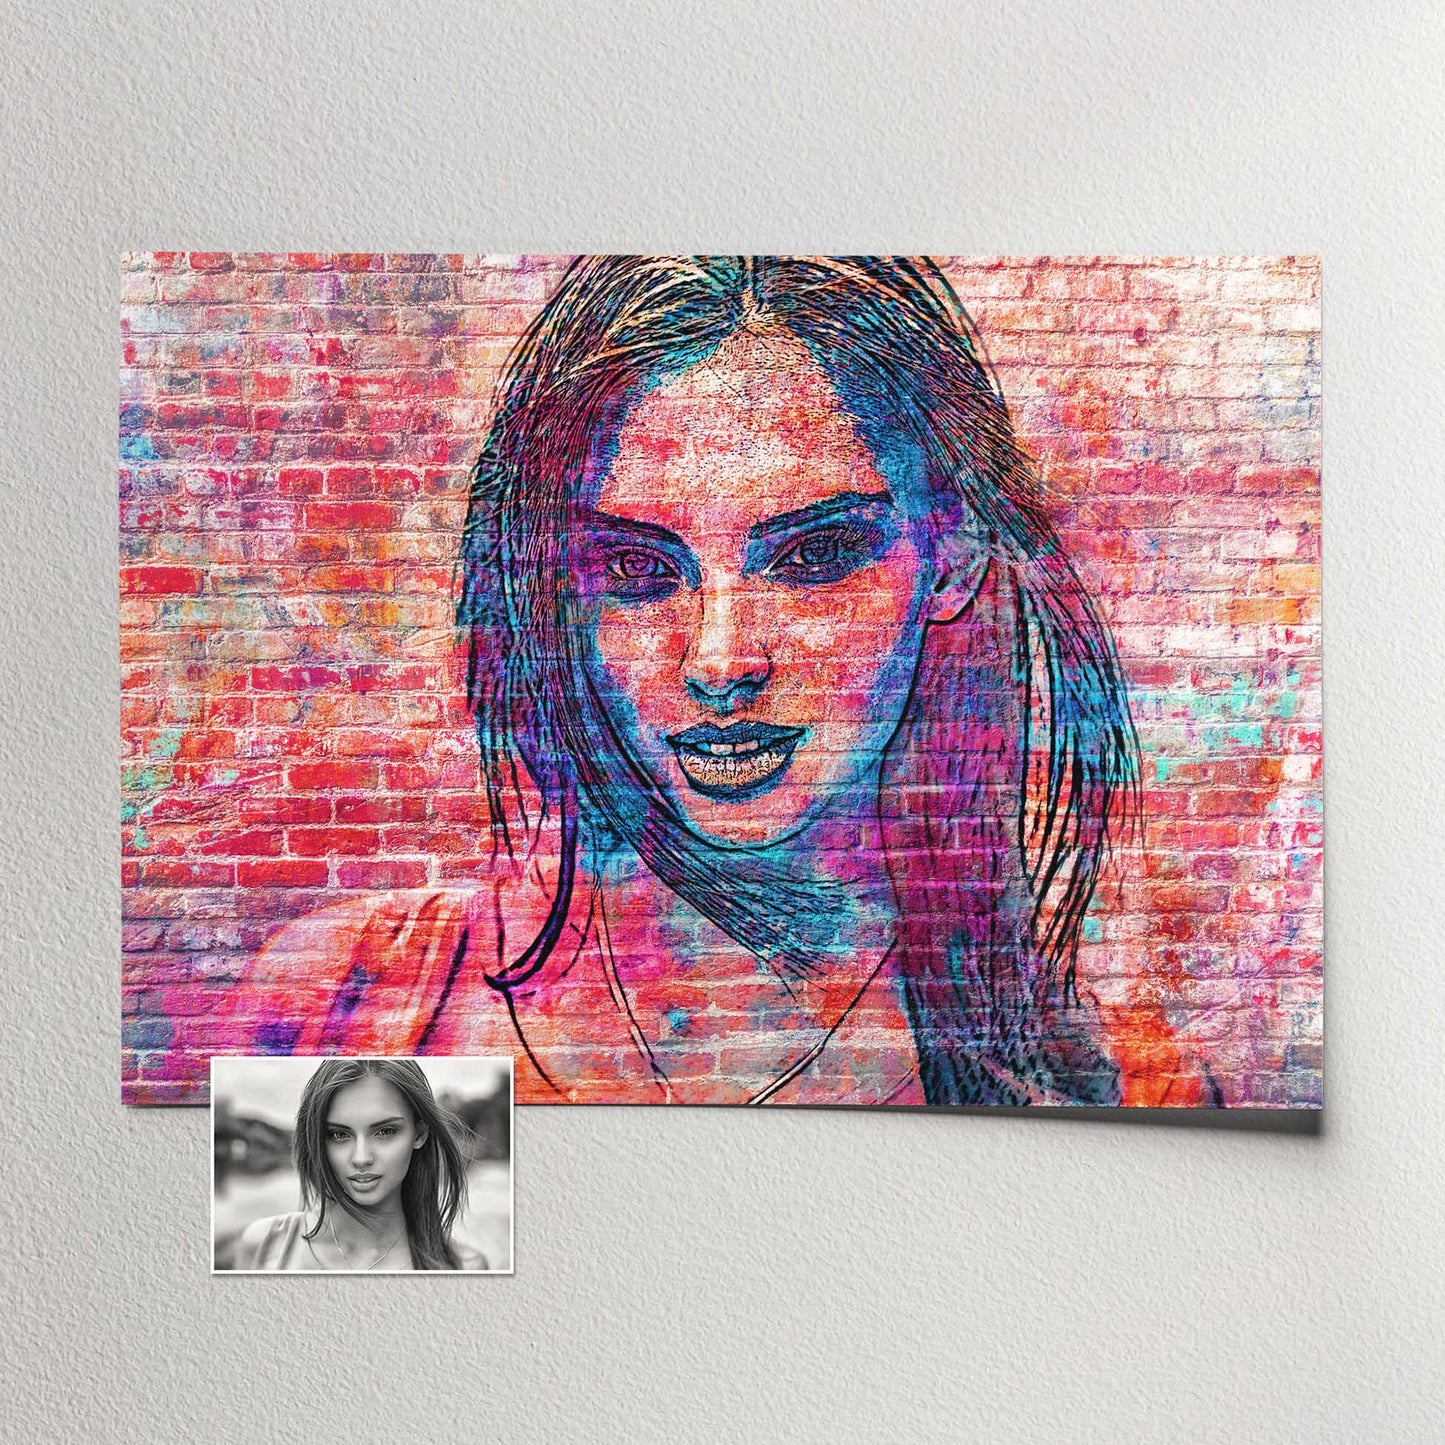 Gallery Quality Interior Design: Elevate your home or office decor with this personalised brick graffiti street art print. Its unique and original style, coupled with the gallery quality finish, brings an artistic touch to any space